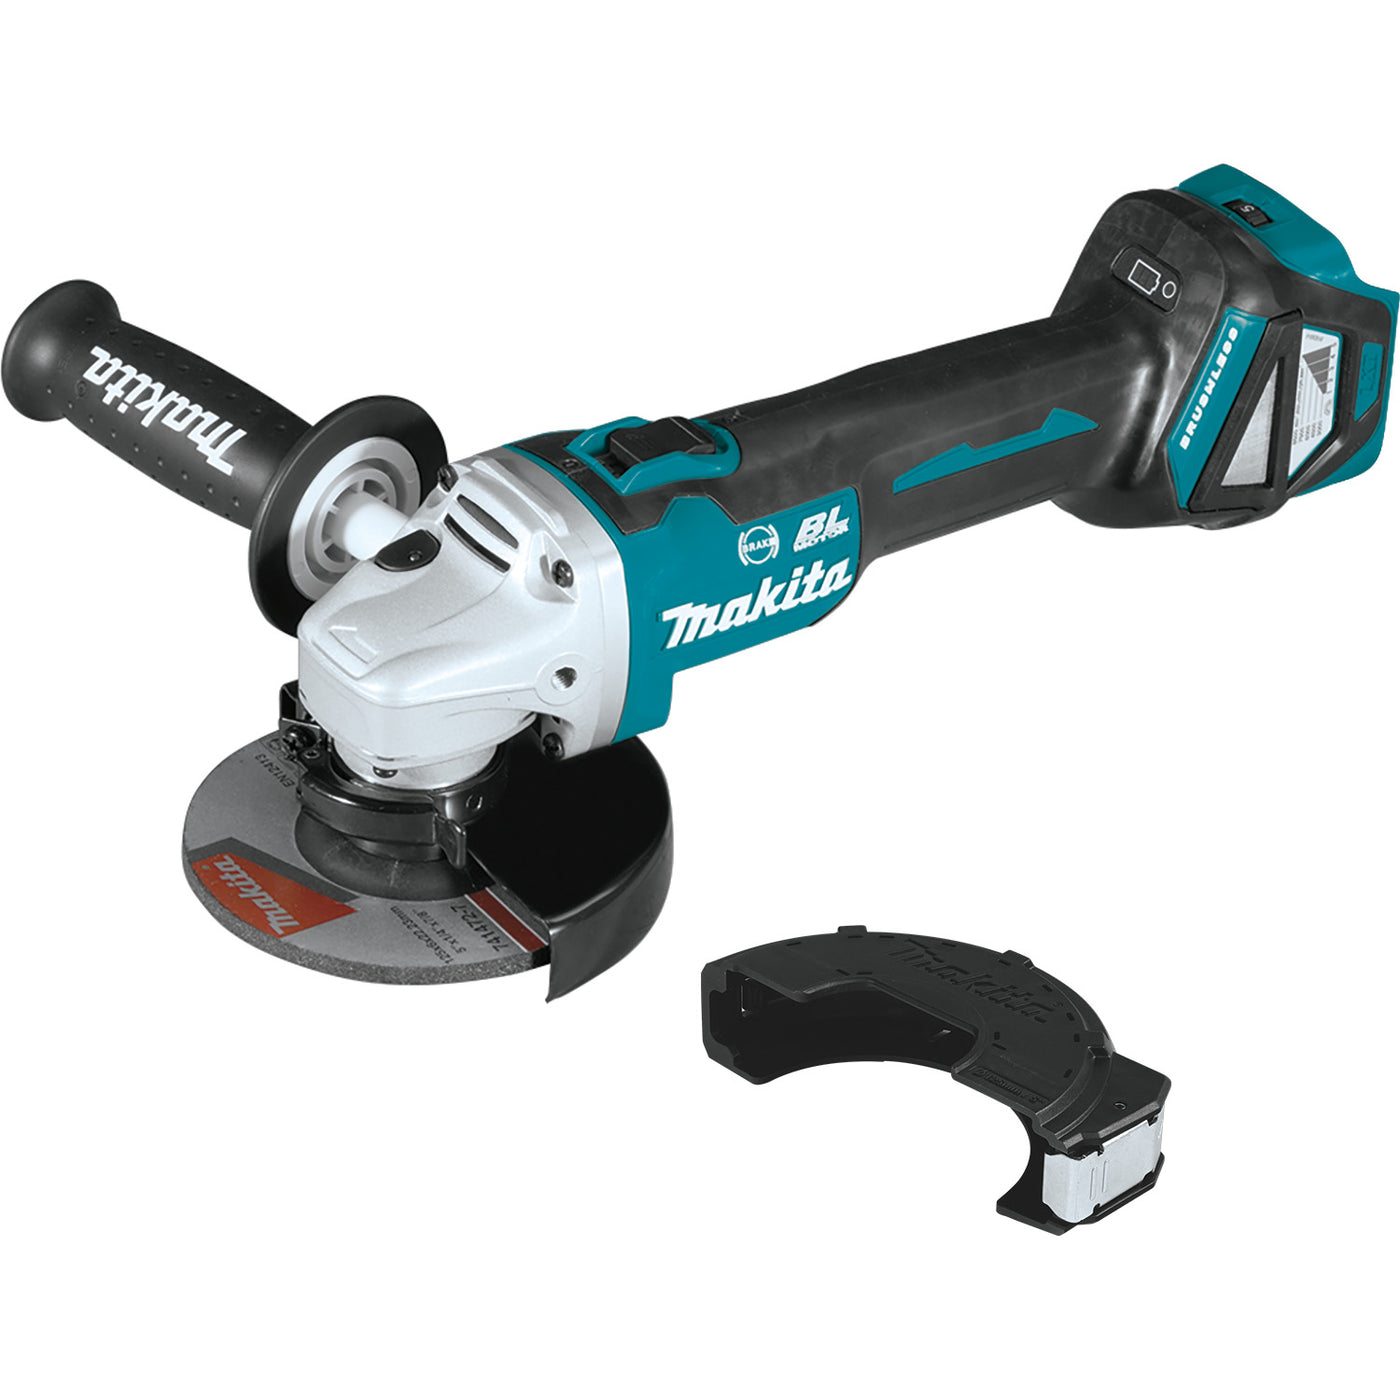 Makita XAG16Z 18V LXT® Lithium-Ion Brushless Cordless 4-1/2” / 5" Cut-Off/Angle Grinder, 3,000-8,500 RPM, var.spd., electric brake, no lock-off, lock-on (Tool Only) - theholdroom